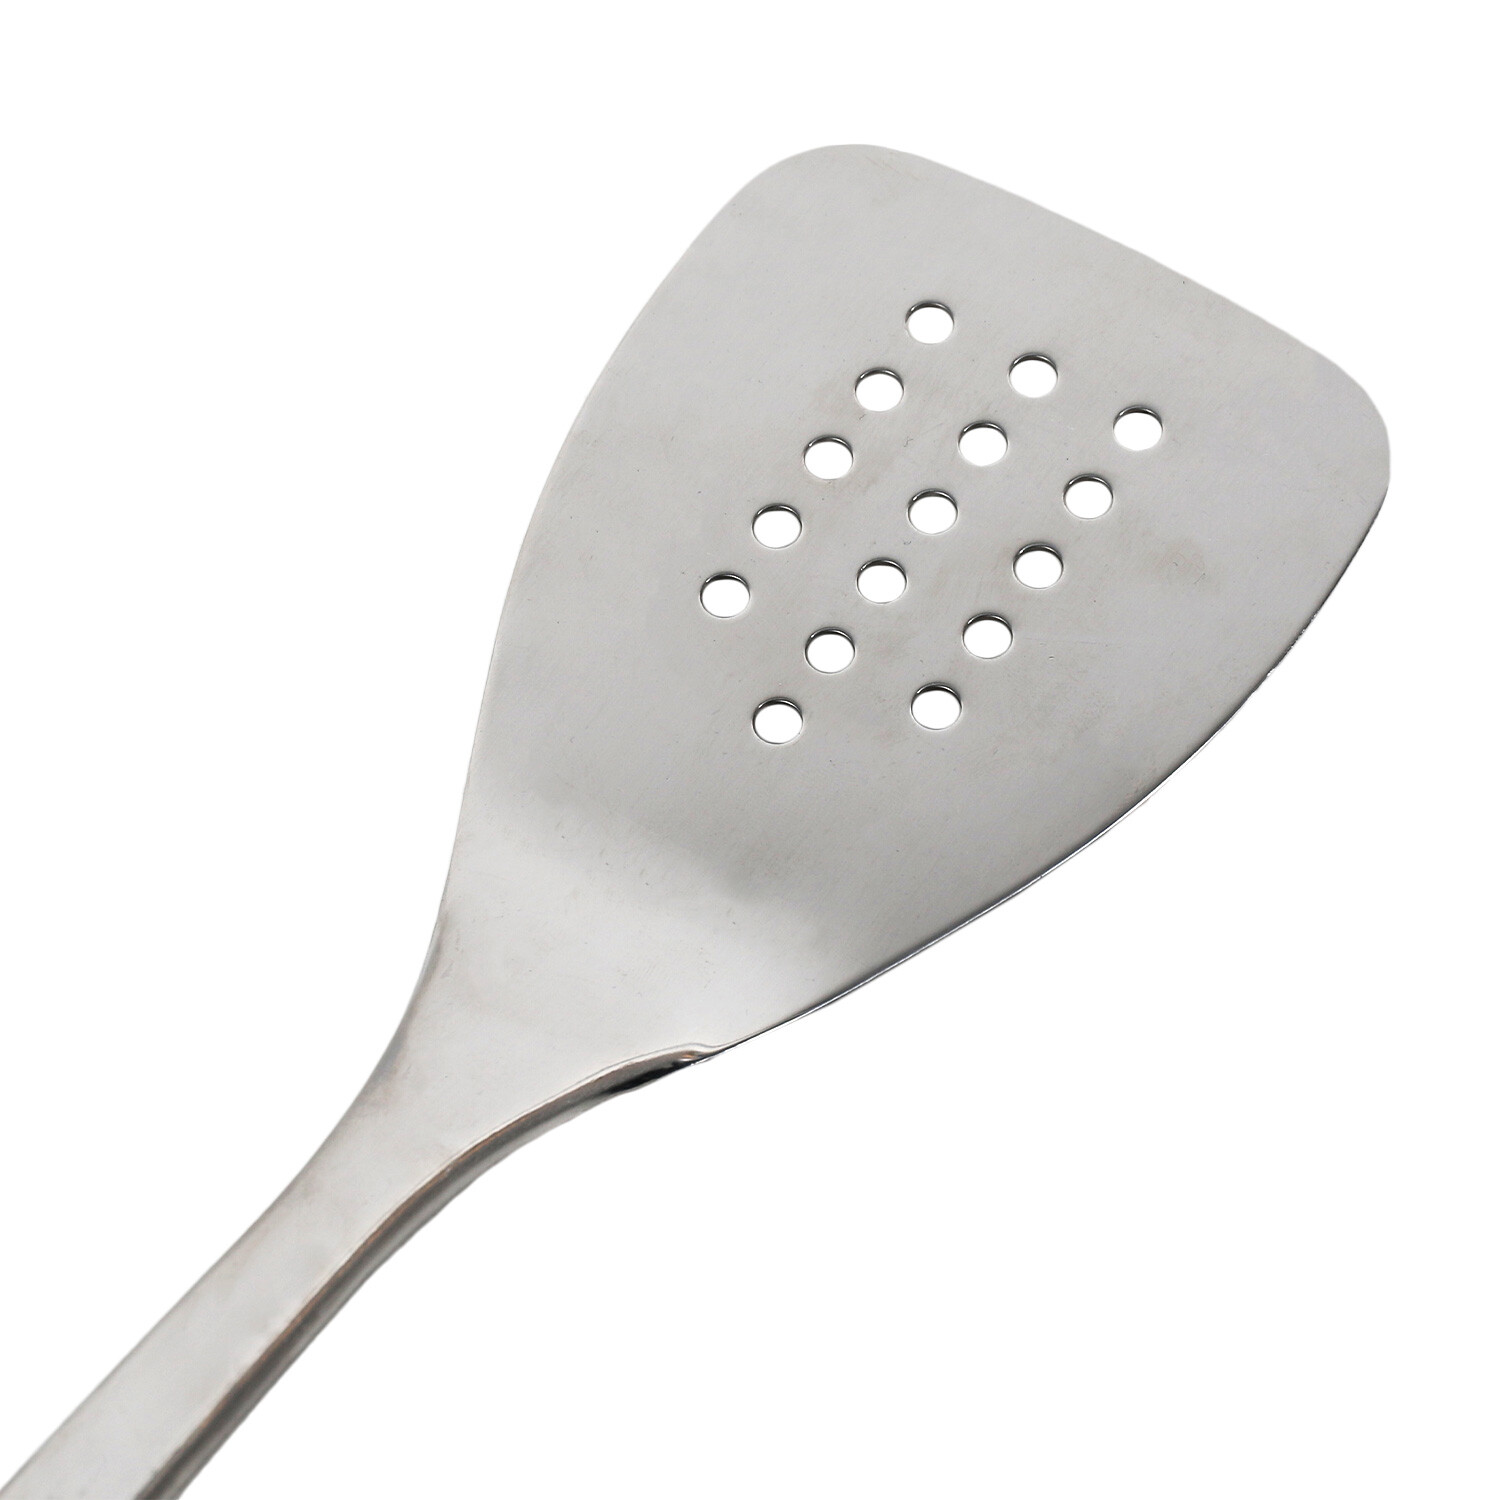 Stainless Steel Slotted Turner with Soft Touch Handle - Grey Image 2